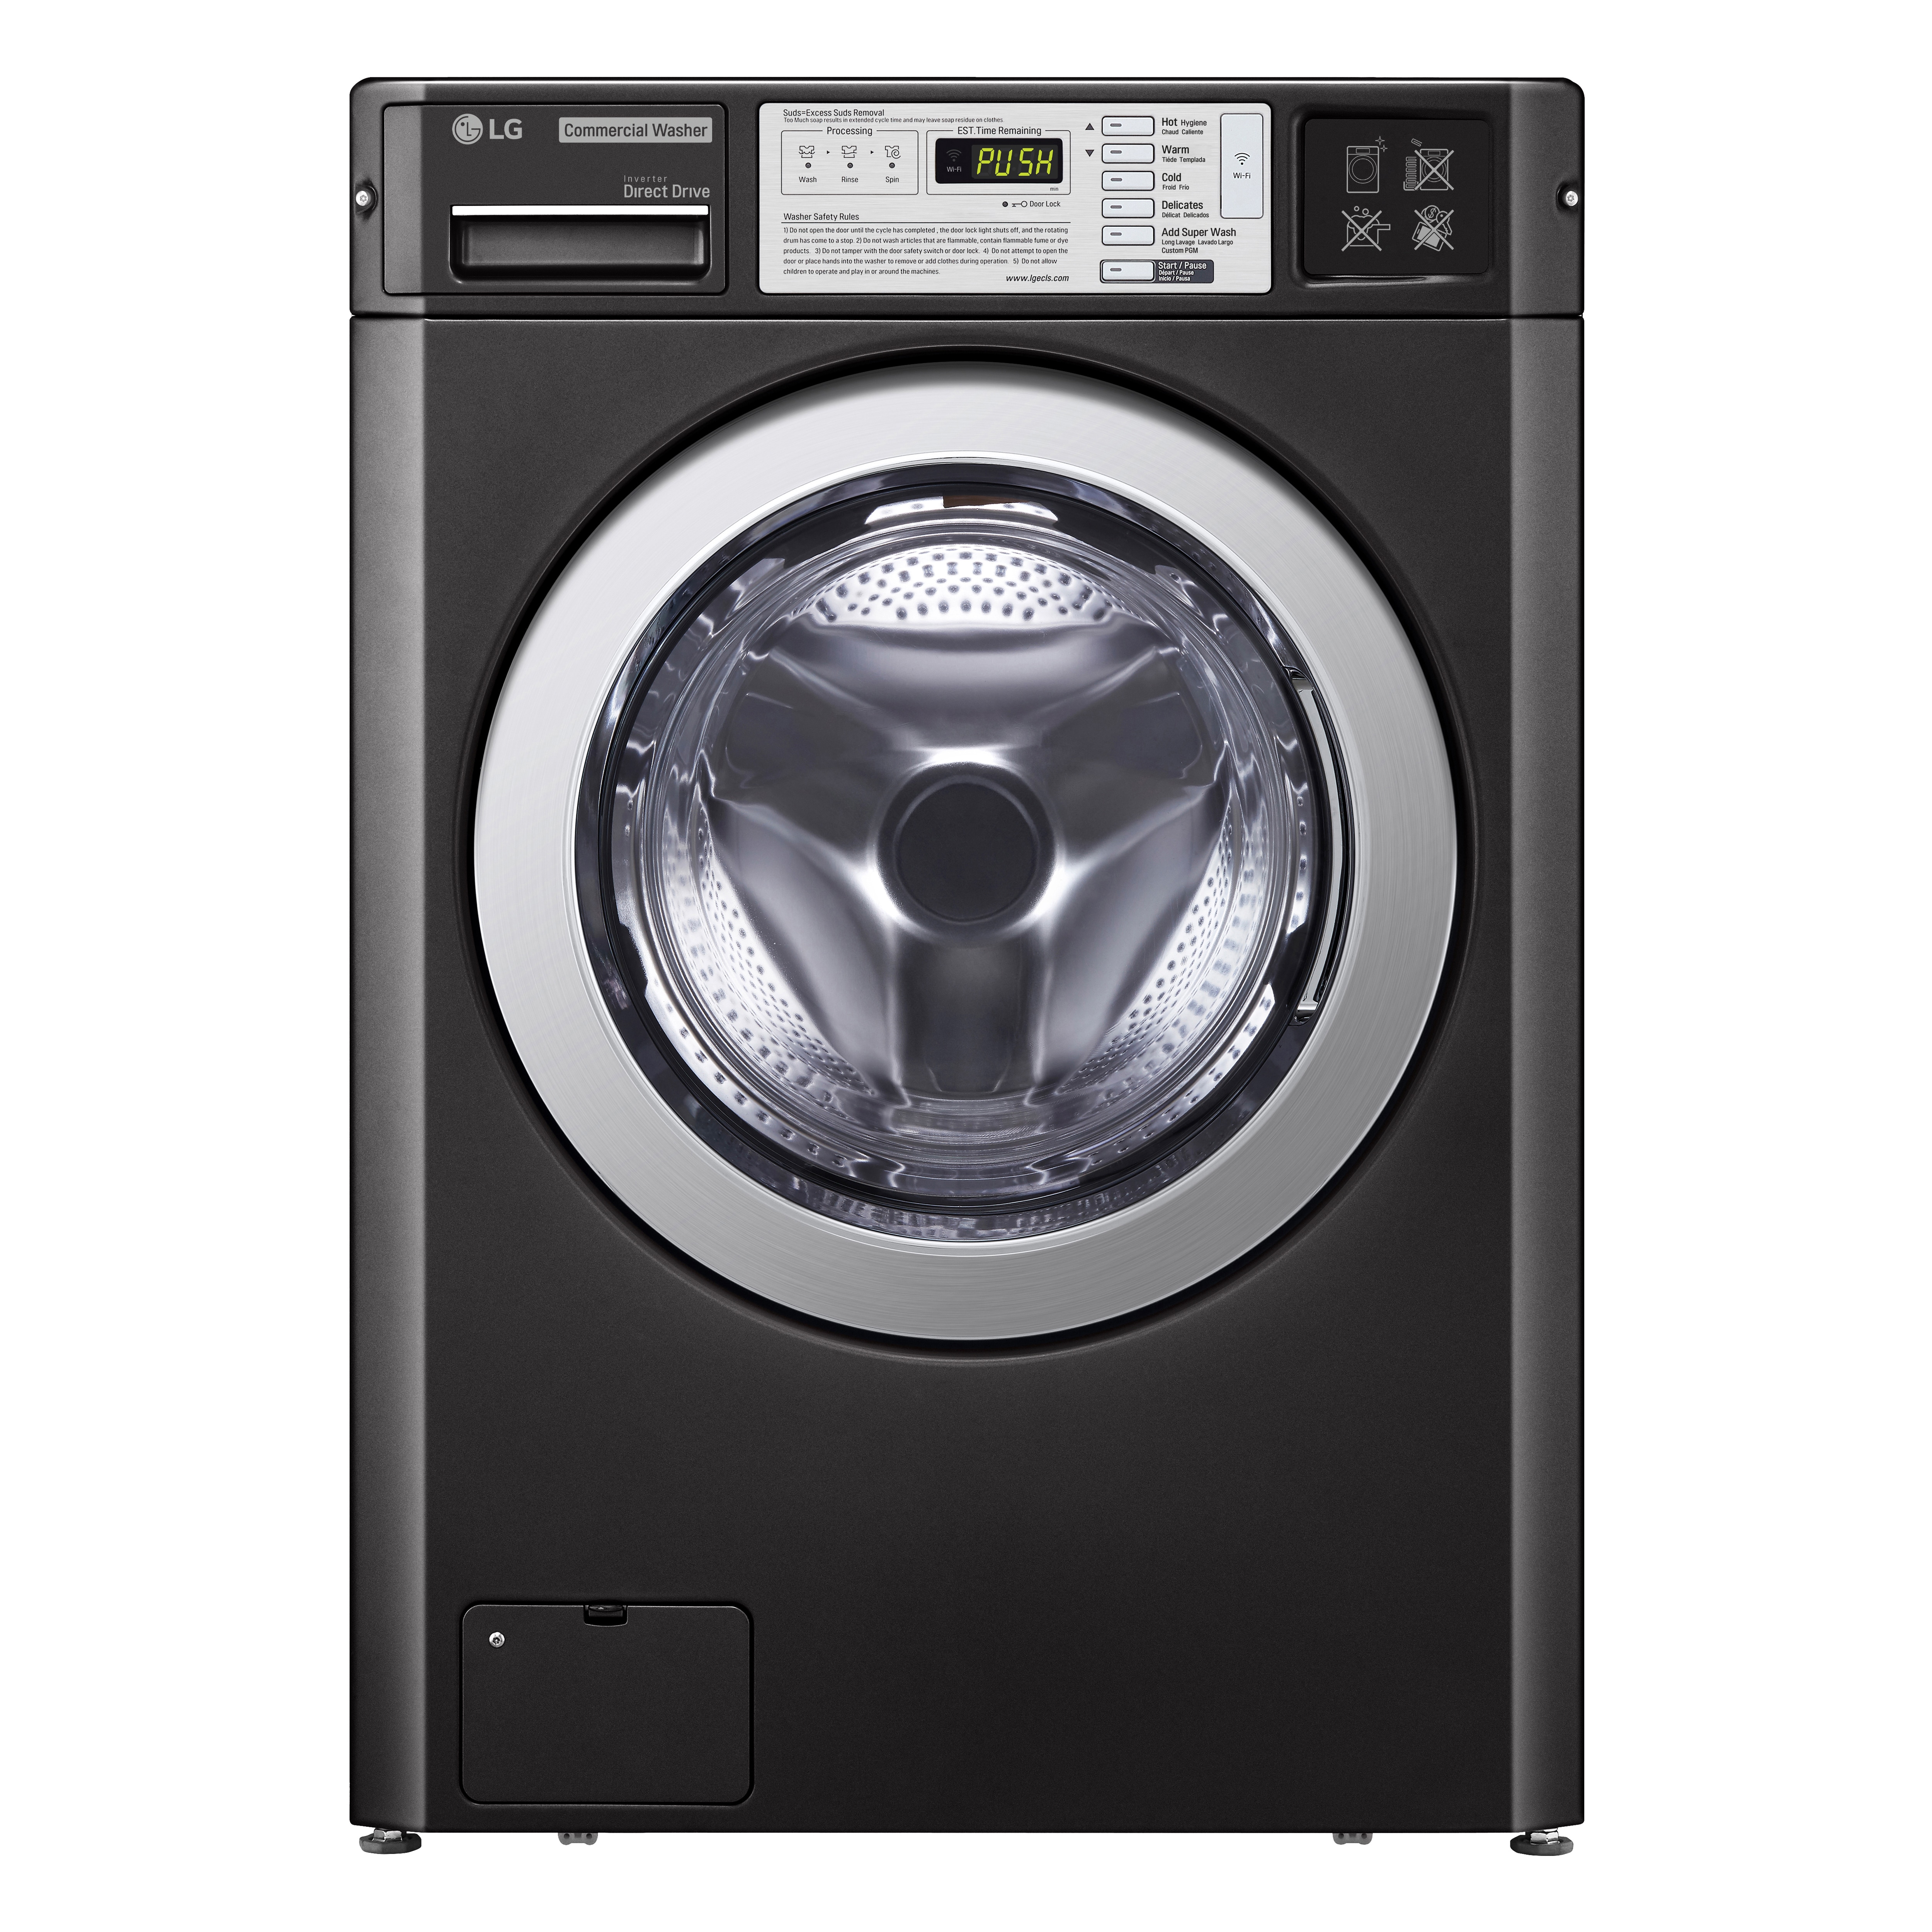 3.7 cu.ft Standard Capacity Frontload Washer 